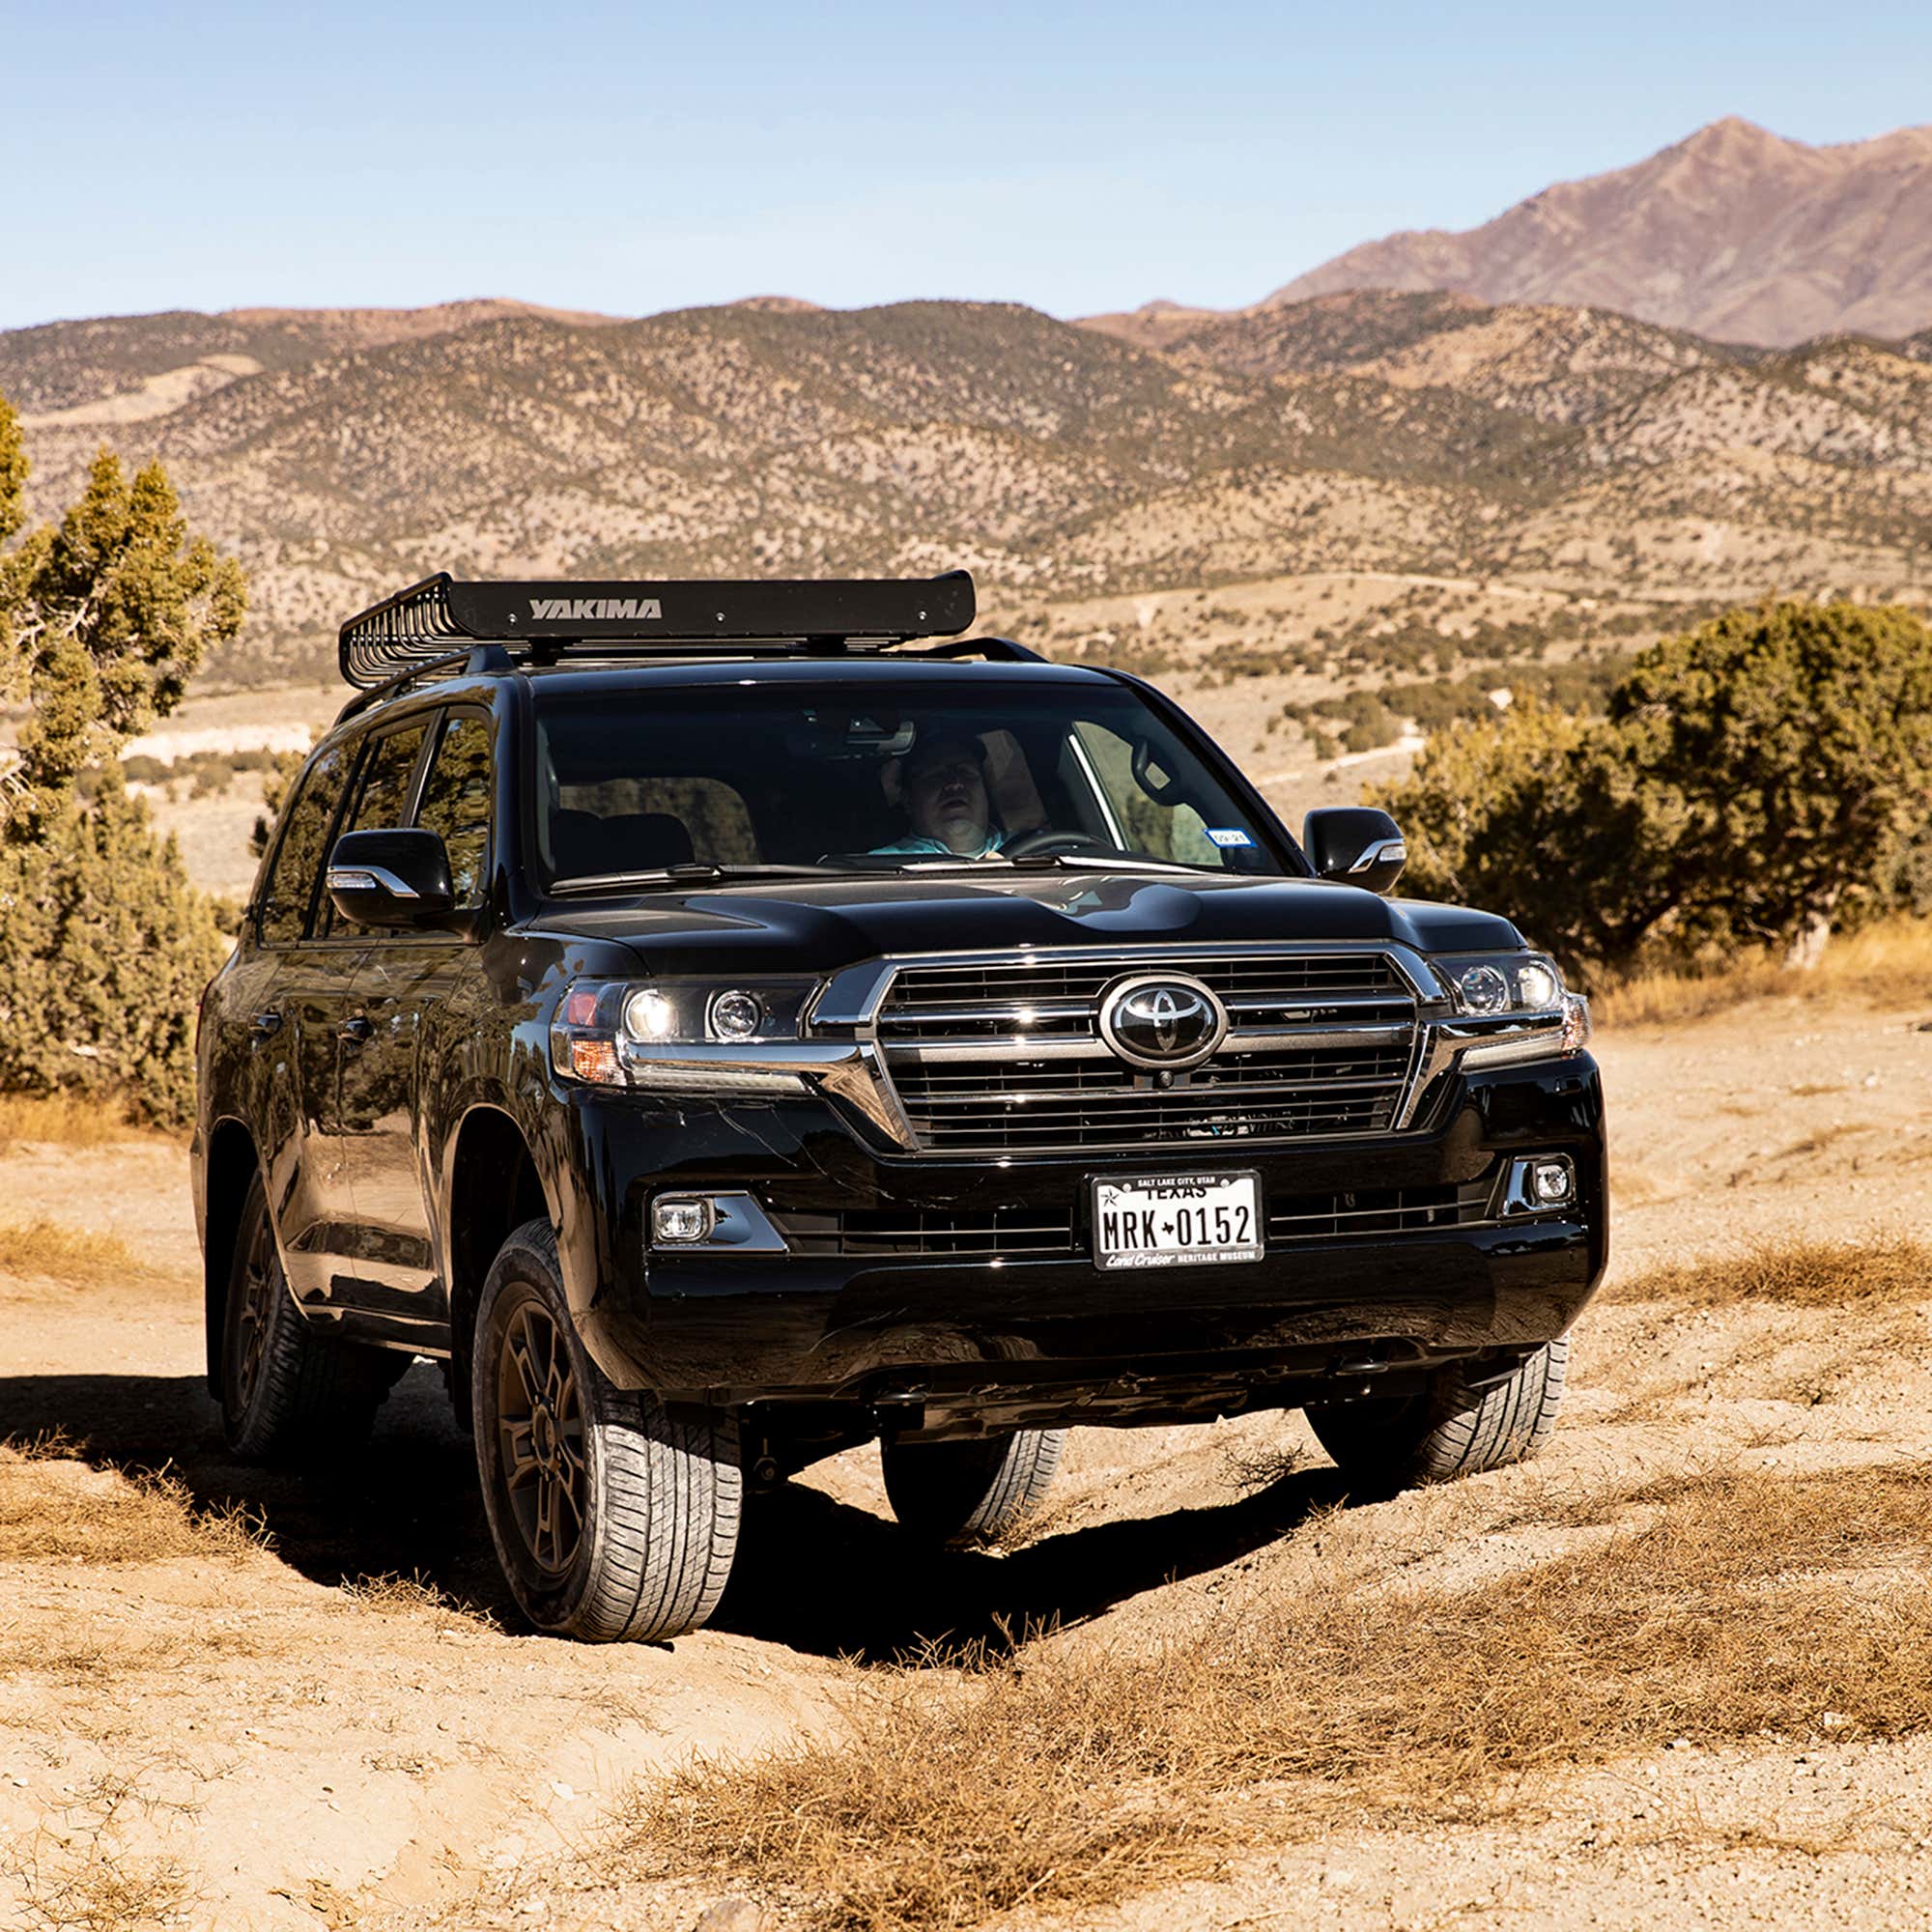 2020 Toyota Land Cruiser Heritage Edition Review This